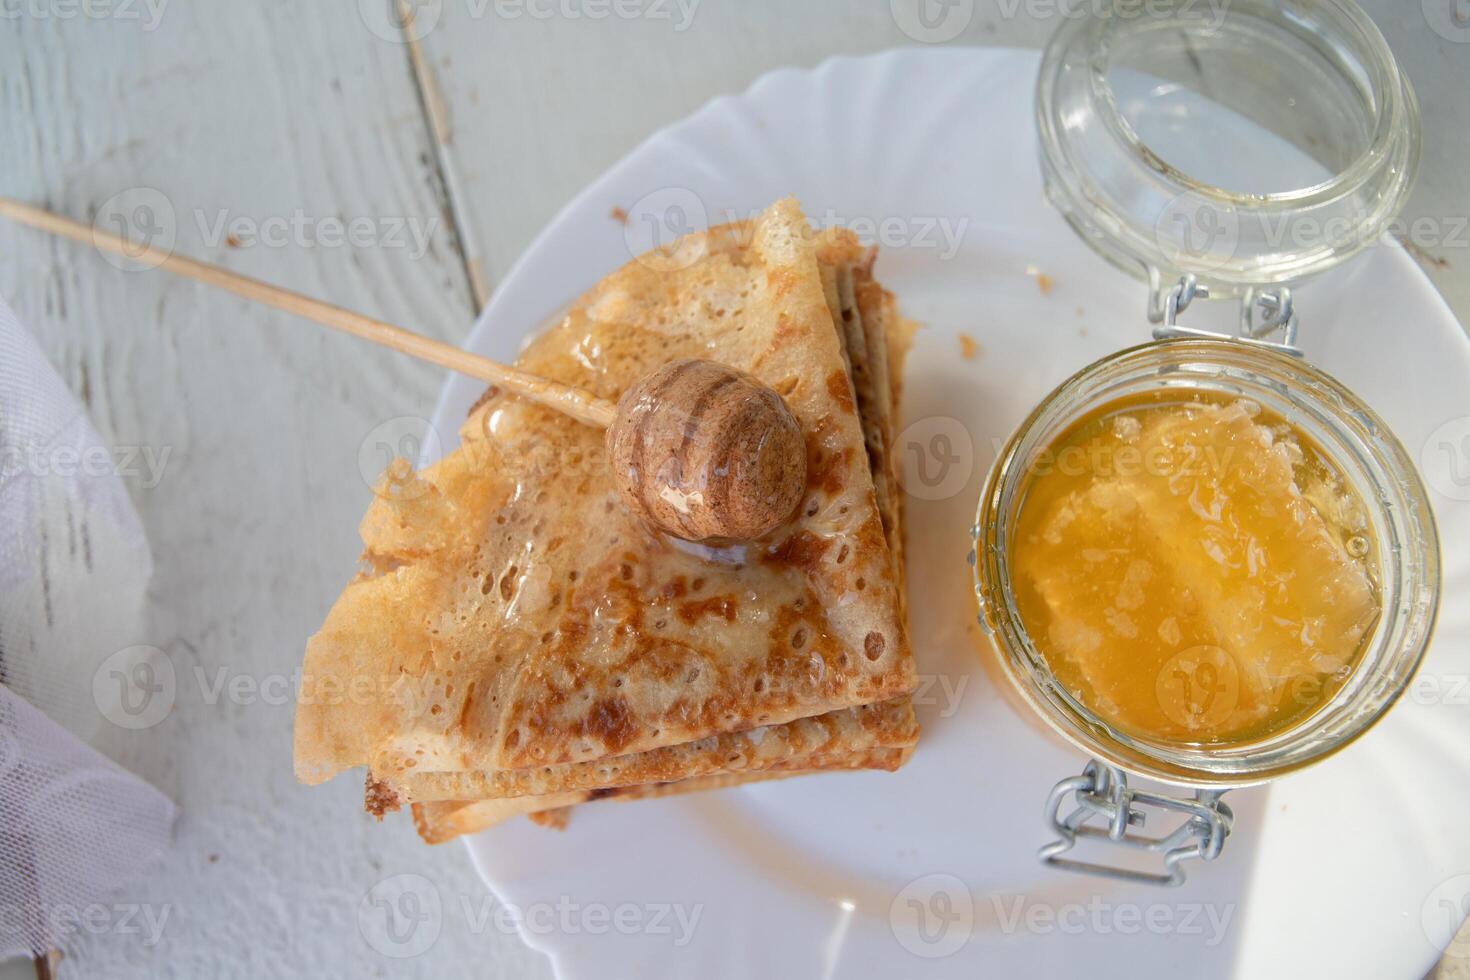 Russian pancakes with honey and a cup of tea from a vintage samovar Maslenitsa festival concept photo